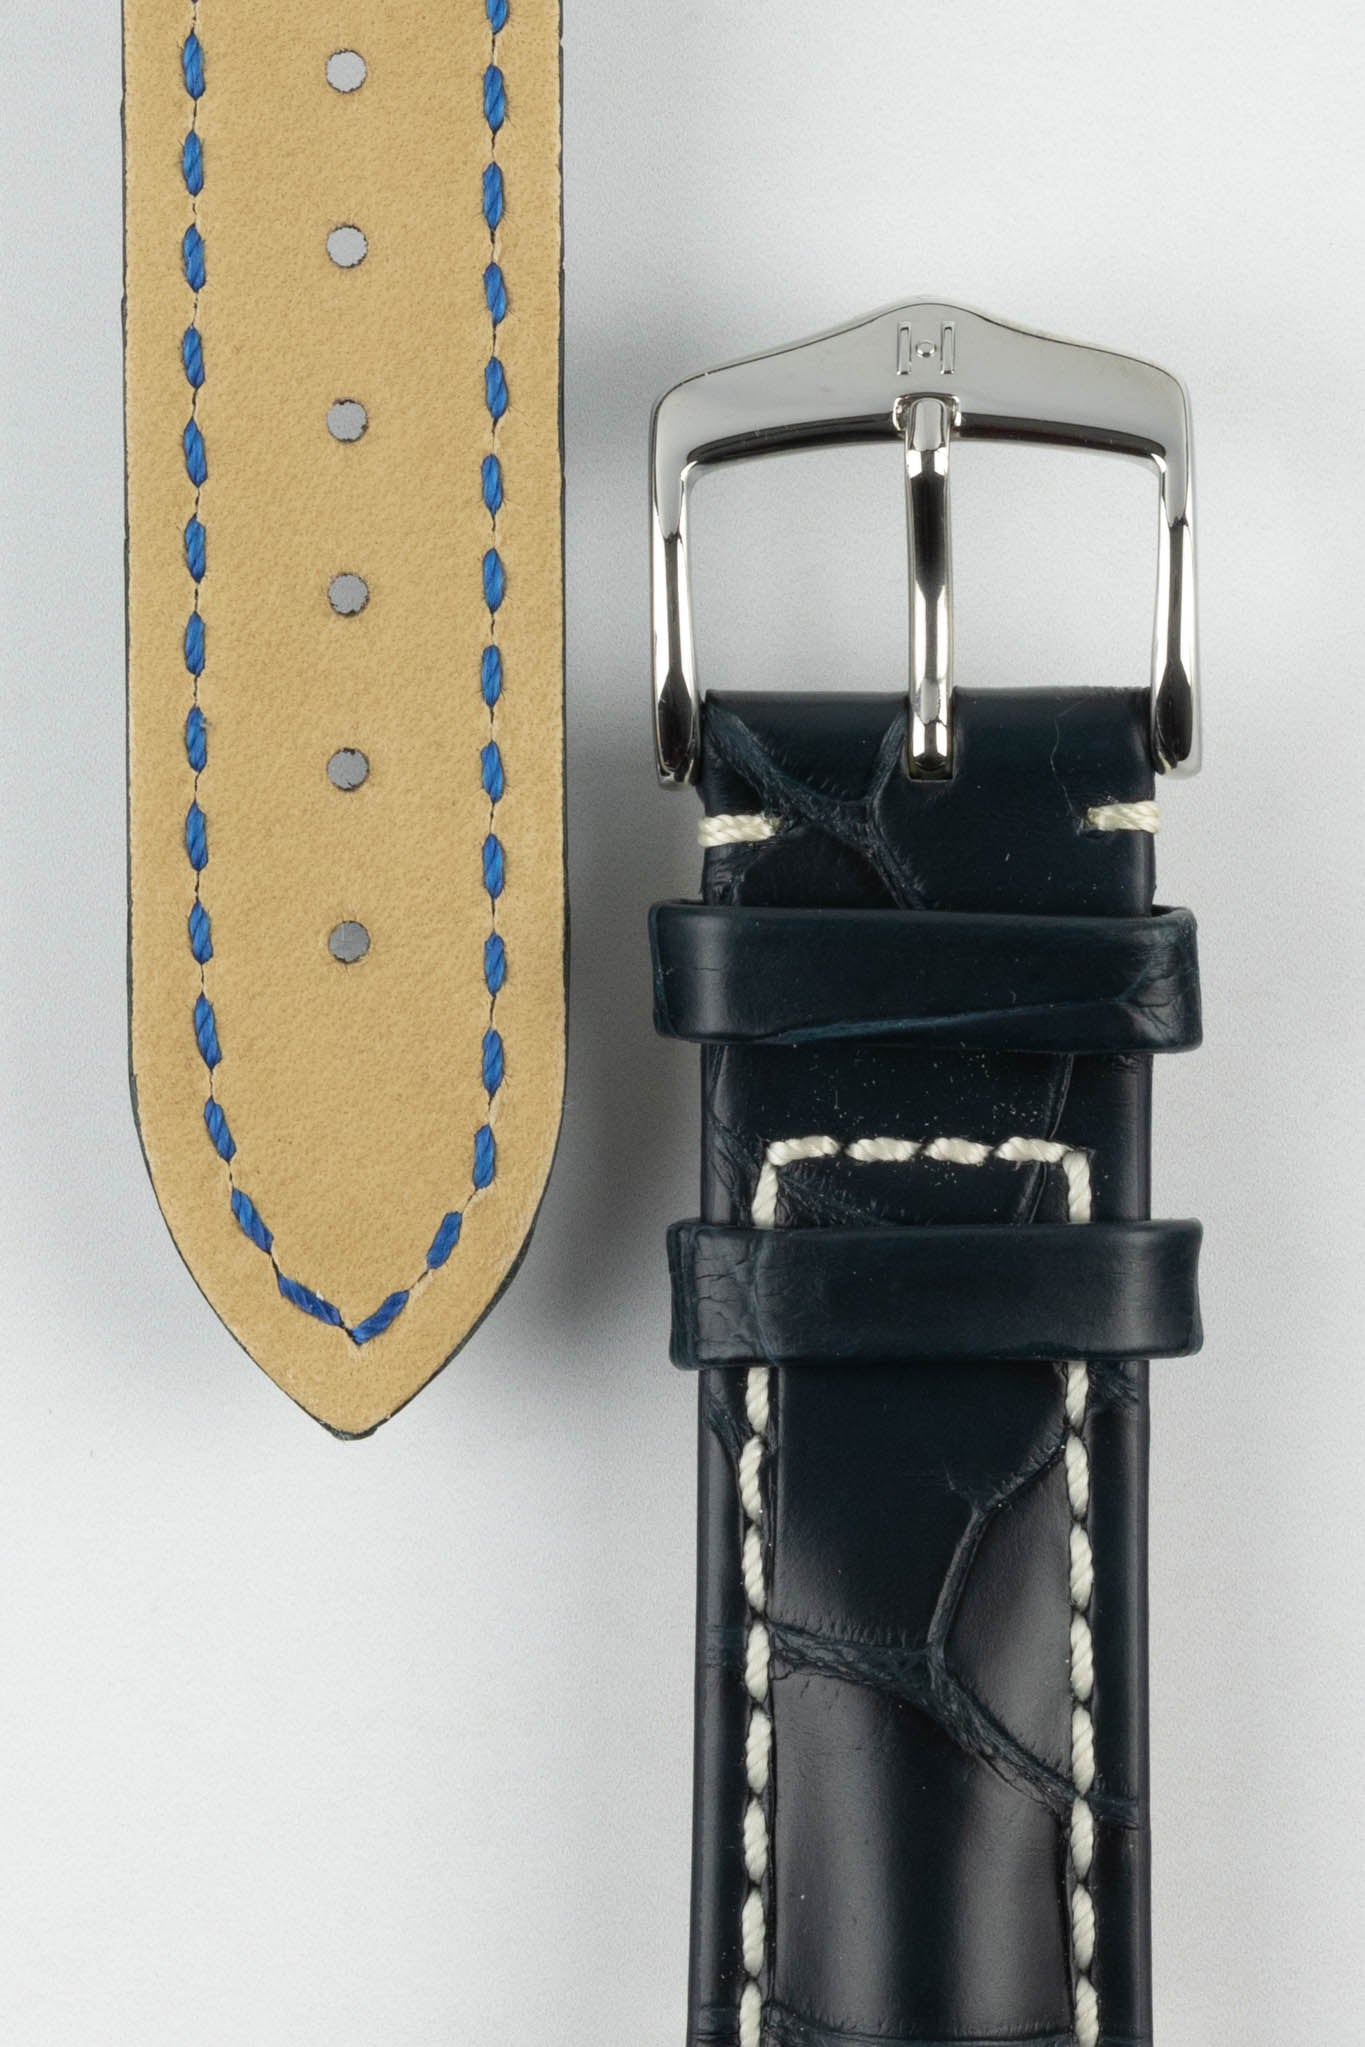 Hirsch CAPITANO Padded Alligator Leather Water-Resistant Watch Strap in BLUE